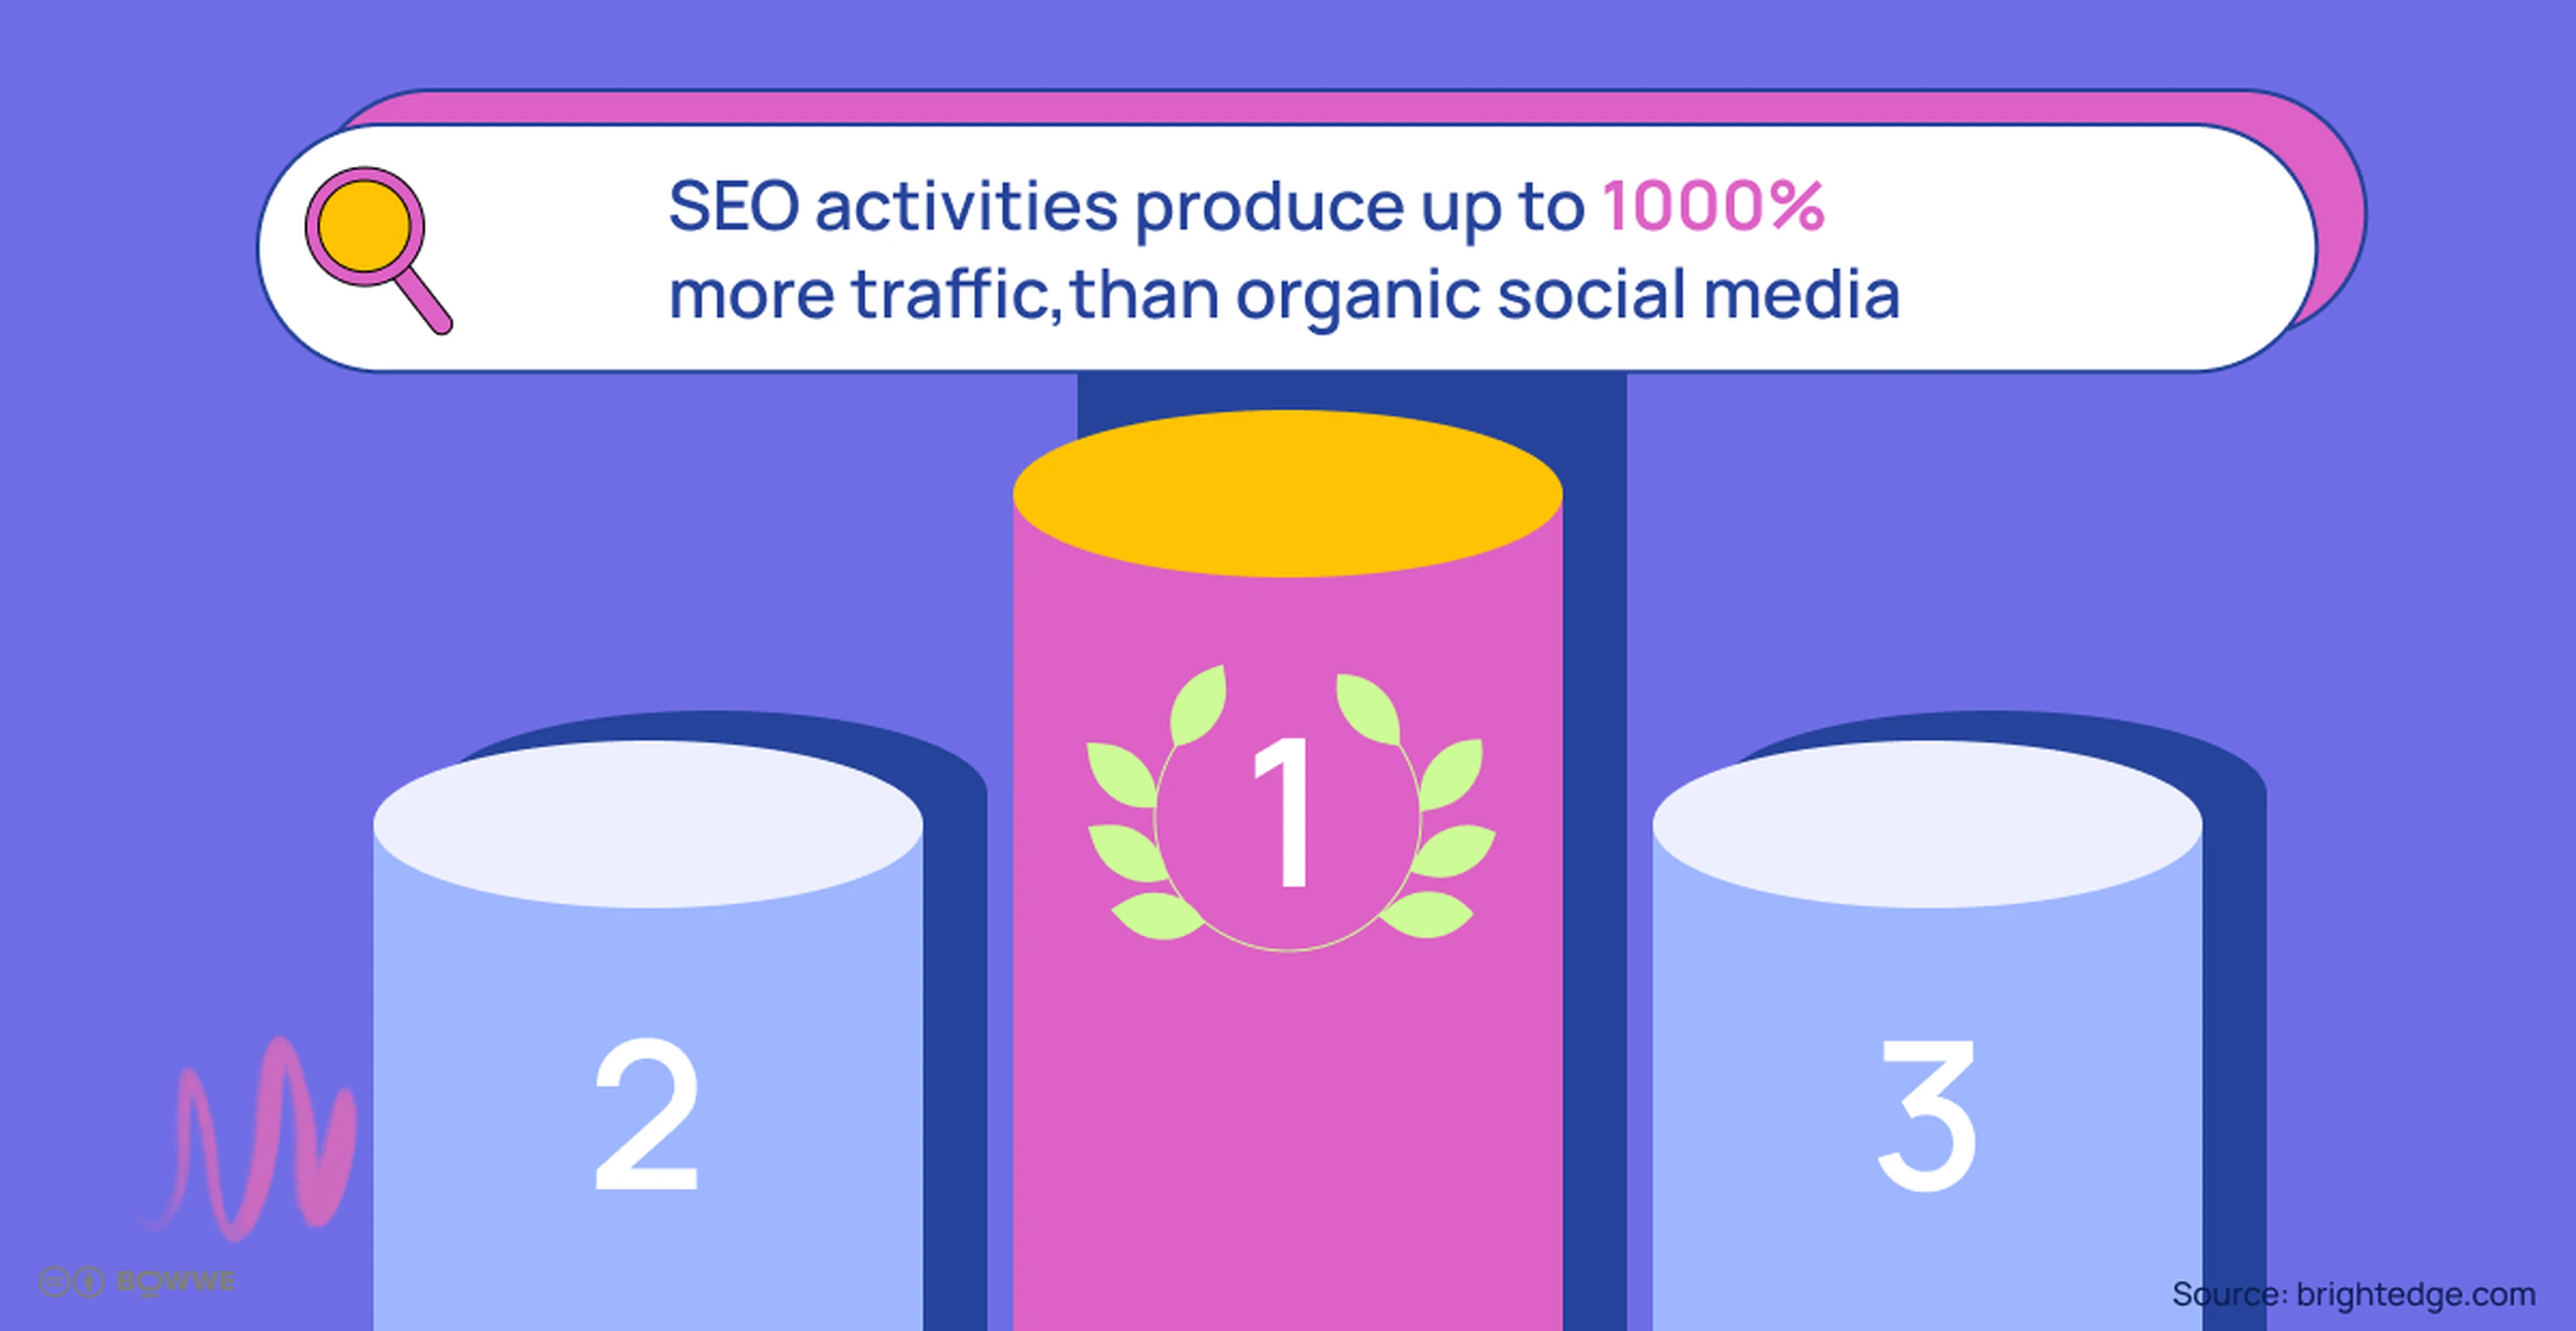 Green graphic with the words "SEO activities produce up to 1000% more traffic than organic social media"